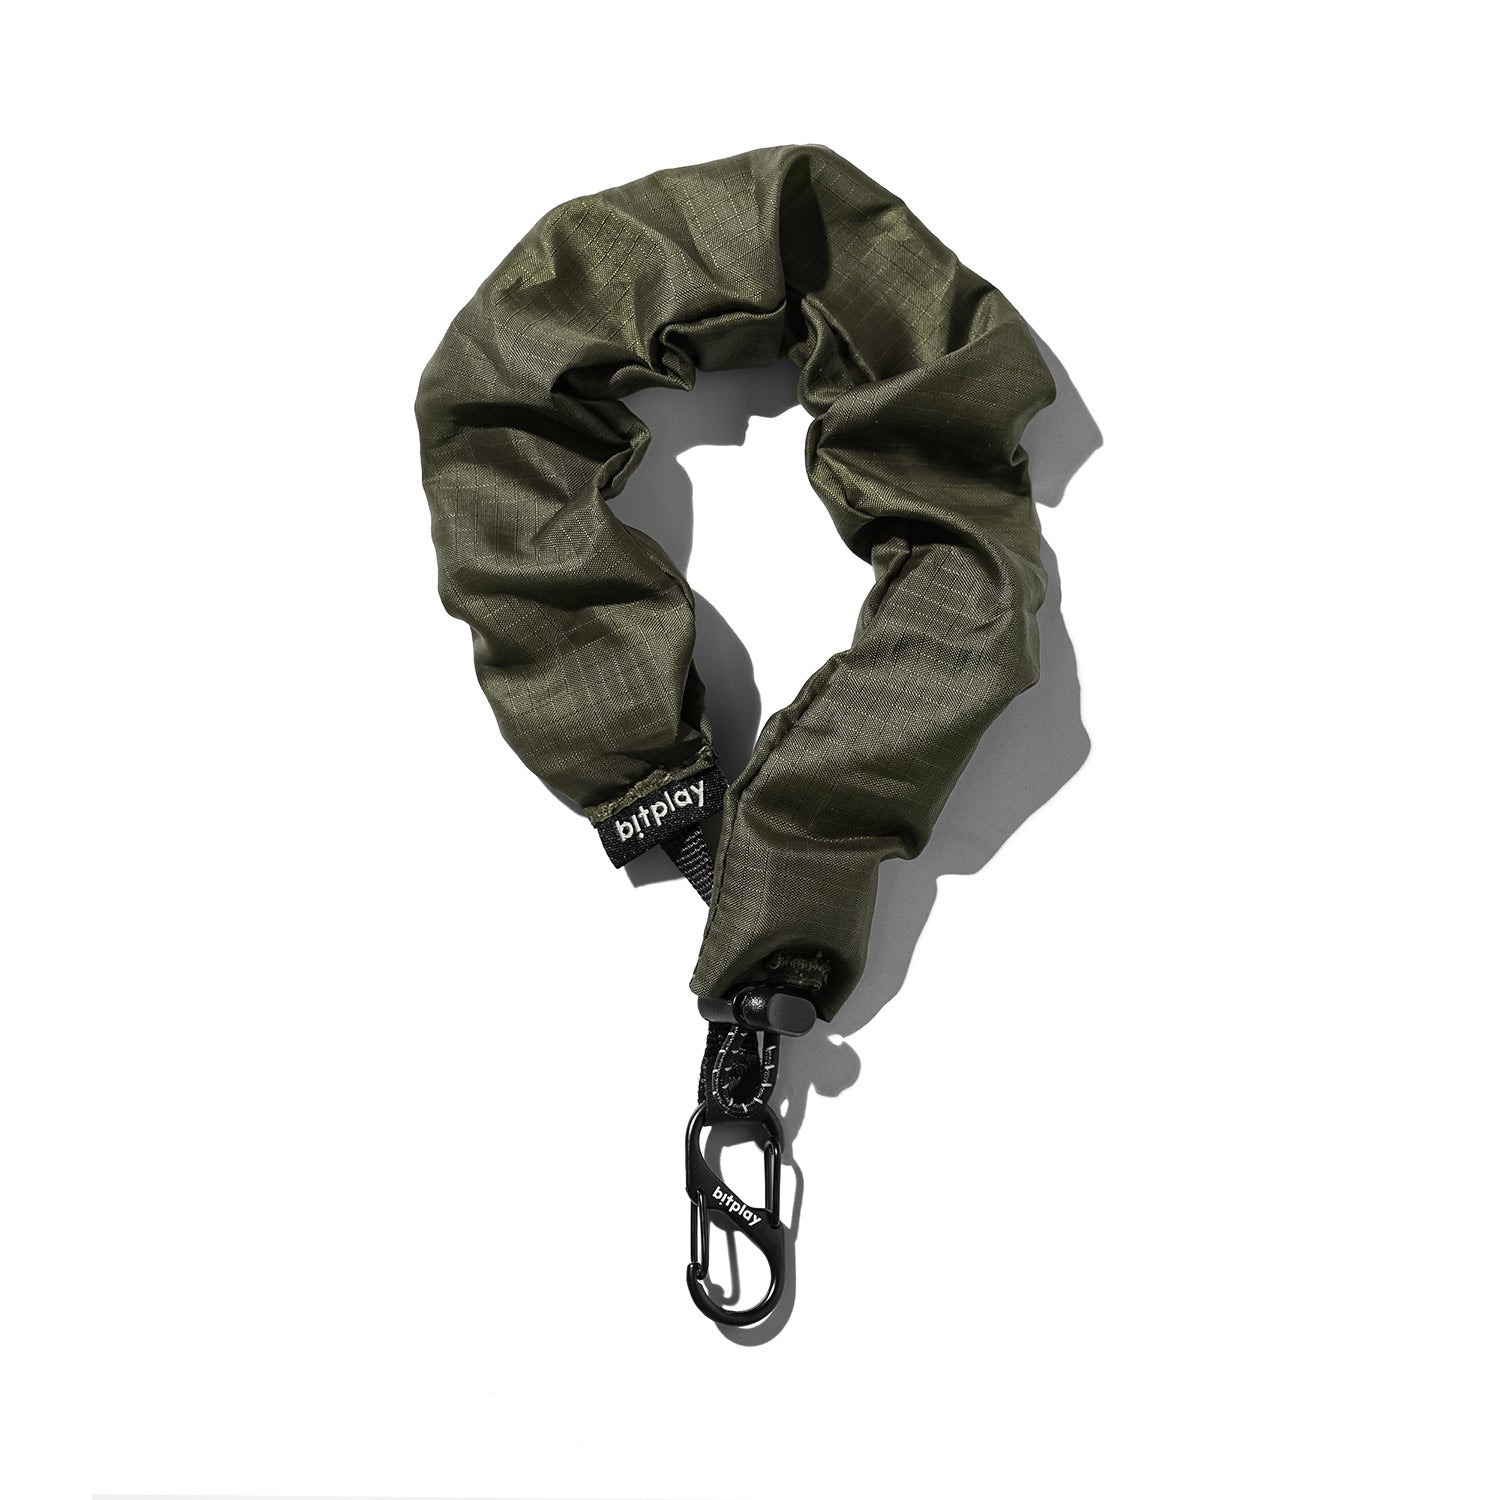 Scrunchie Wrist Strap - Moss Green (Strap Adapter included）